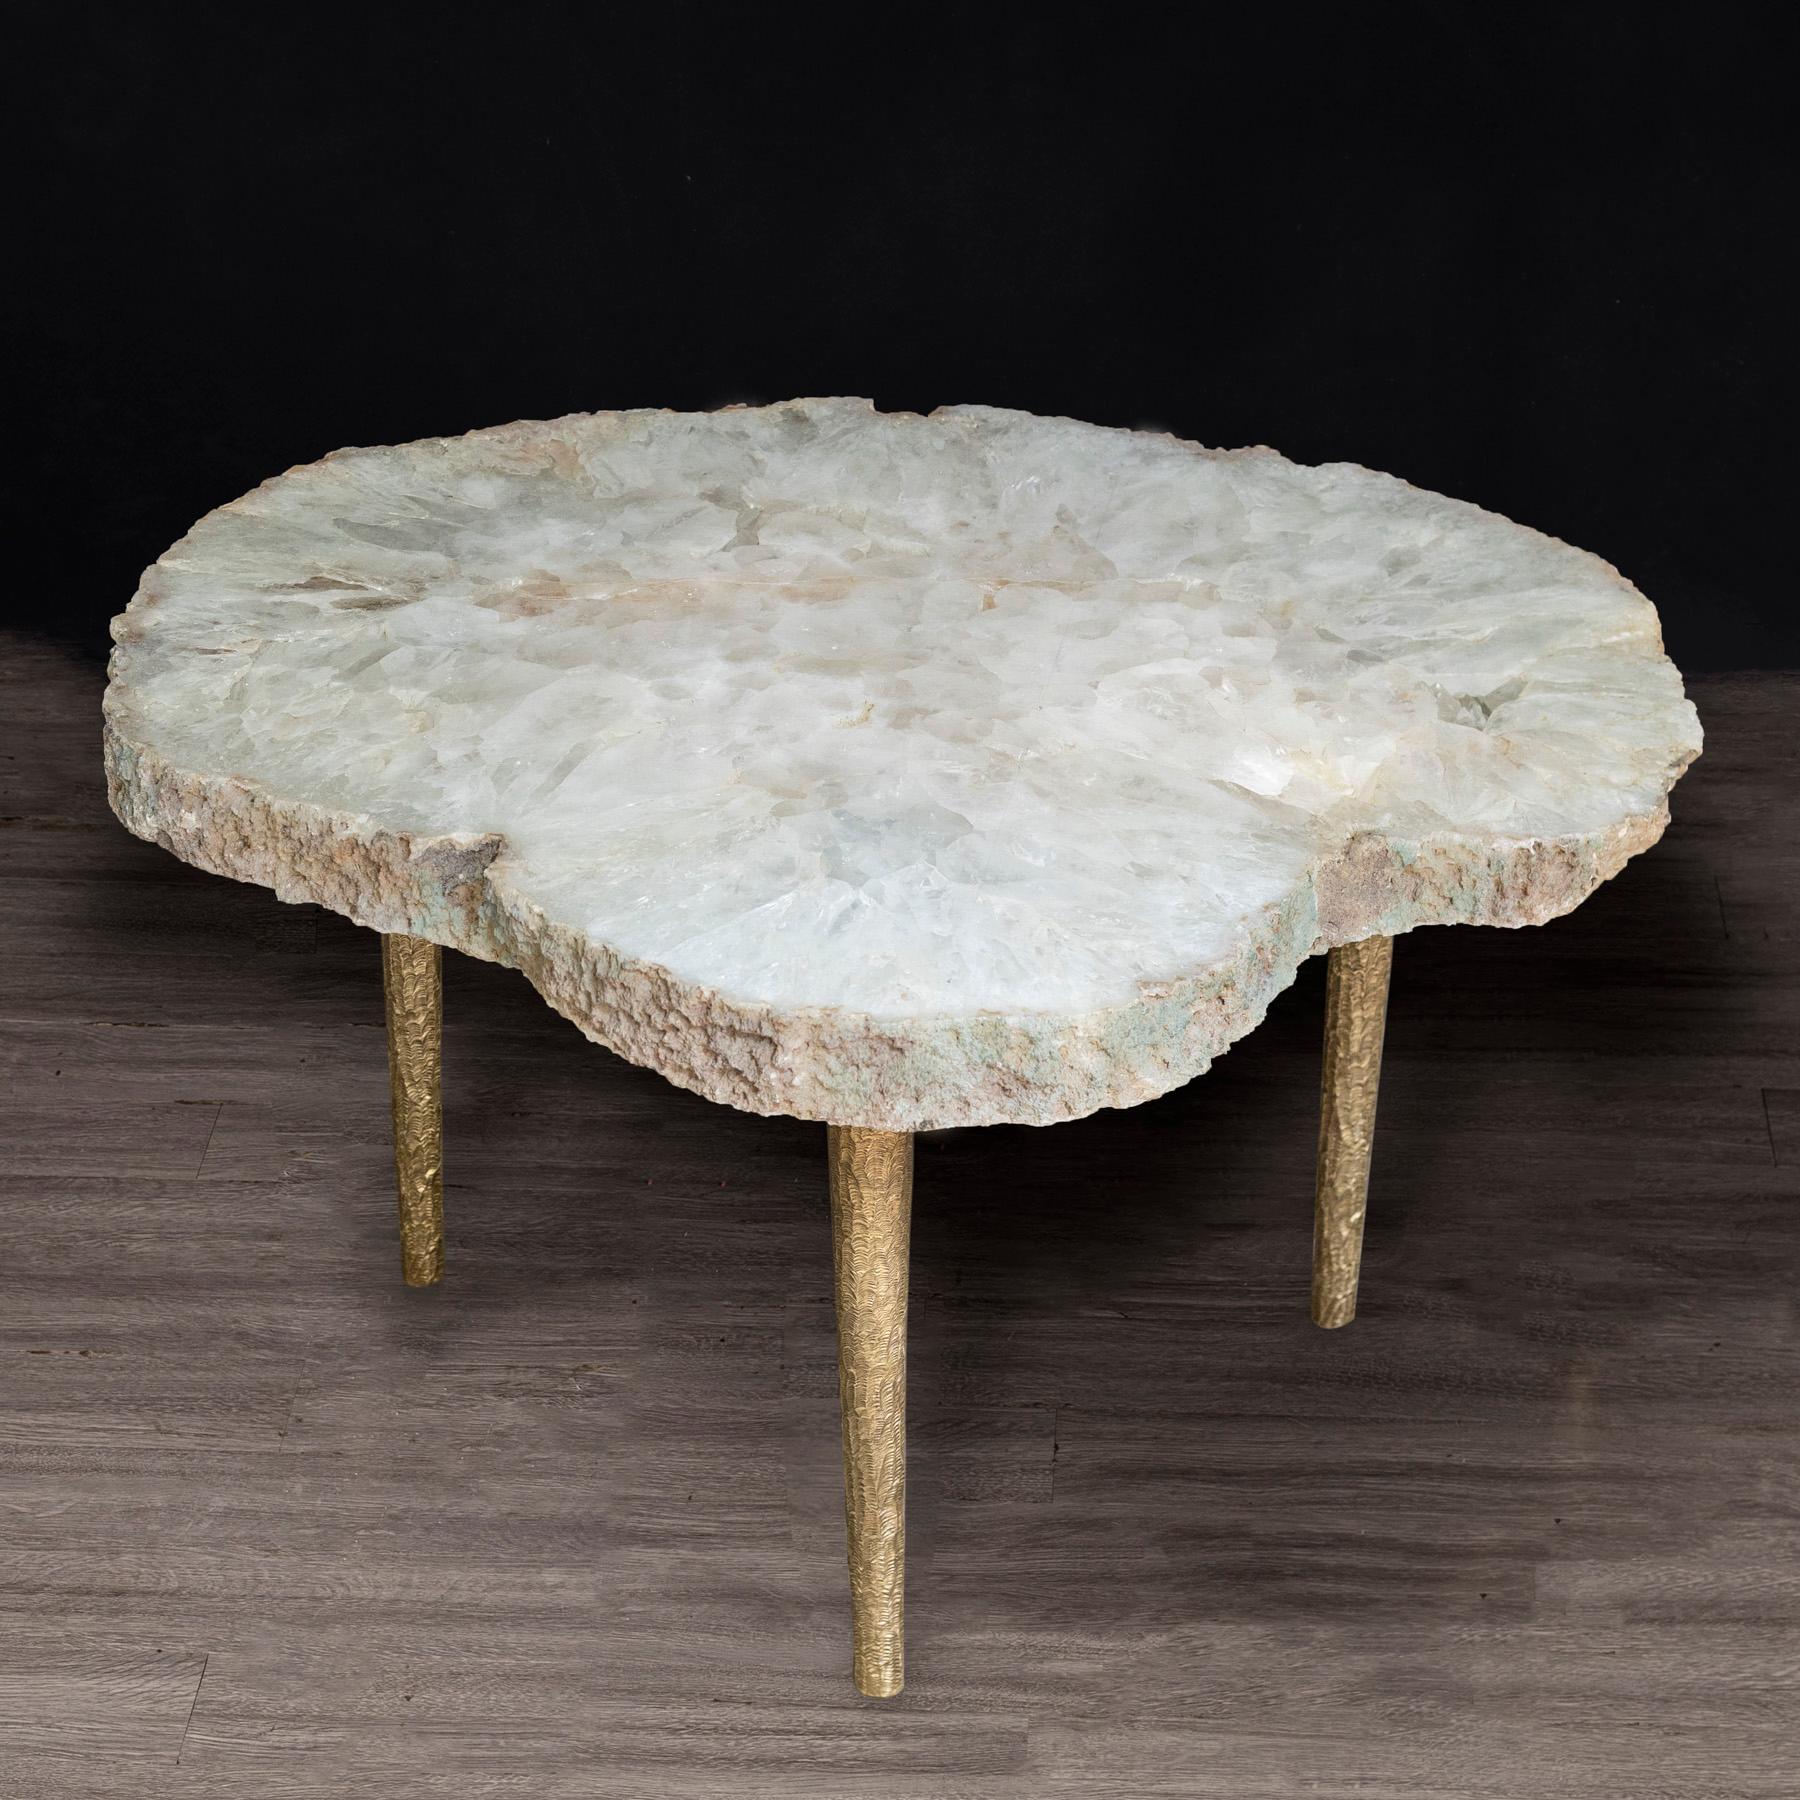 This agate slab forming a side table or cocktail table, is from Brazil and has a combination of colors with hints of white and gold. Agates are formed in rounded nodules, which are sliced open to bring out the internal pattern hidden in the stone.